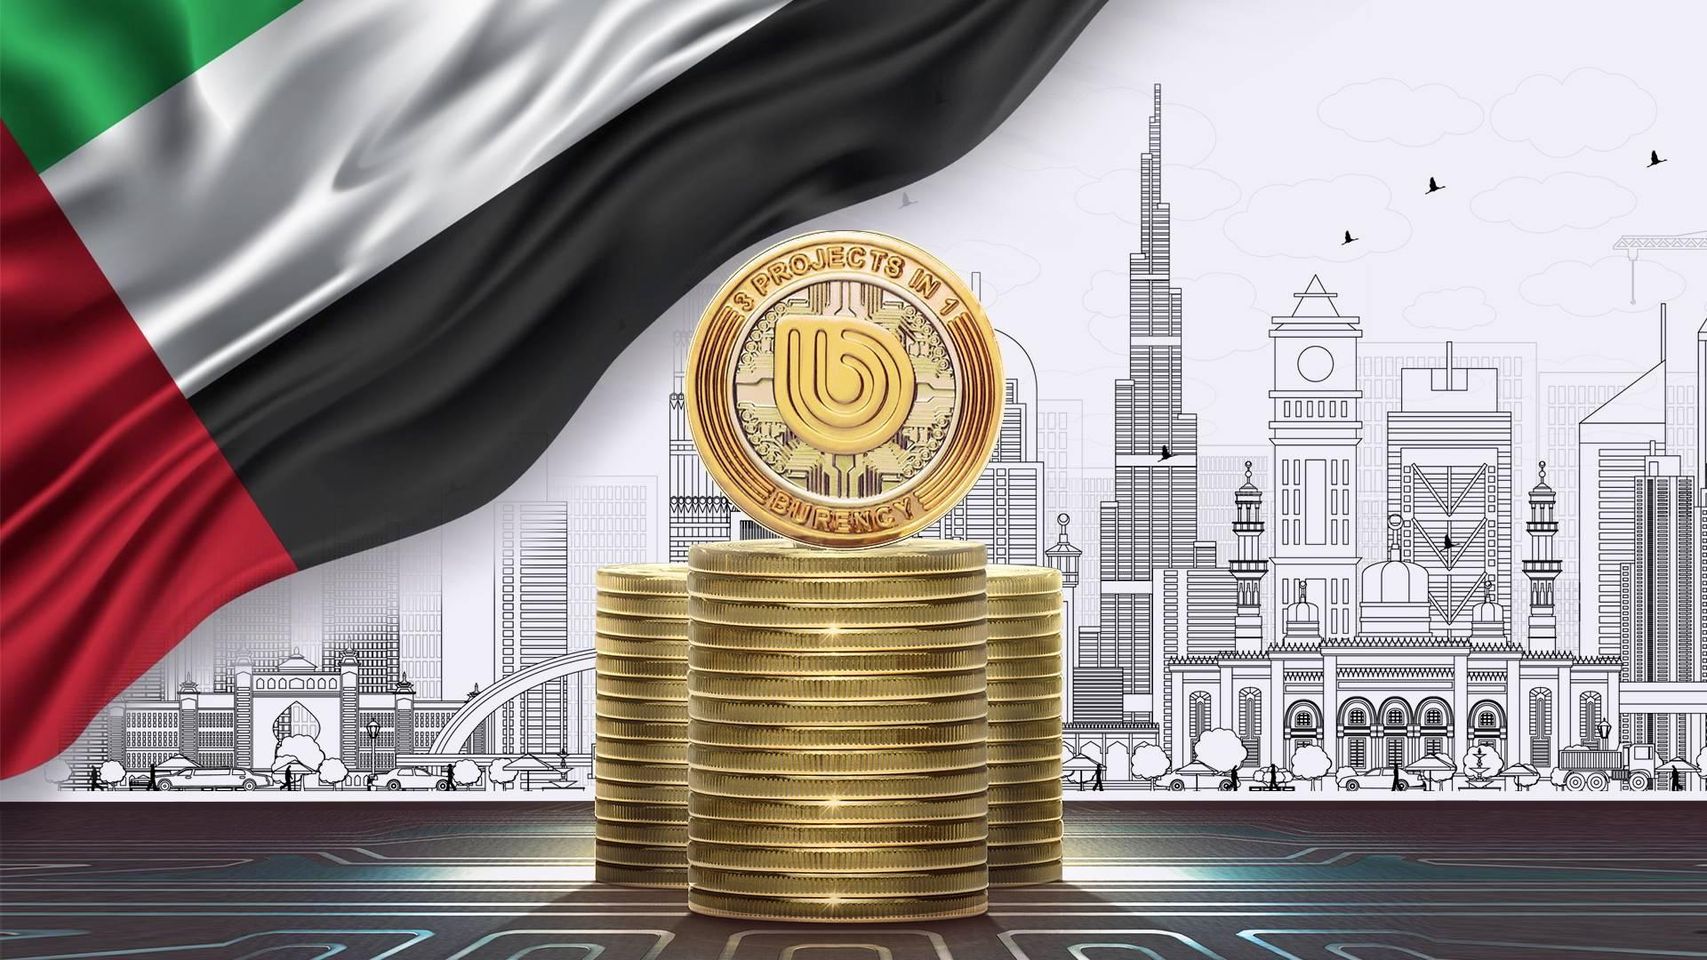 Cryptocurrency has shifted the paradigm of real estate transactions in Dubai property market due to its effectiveness and safety.